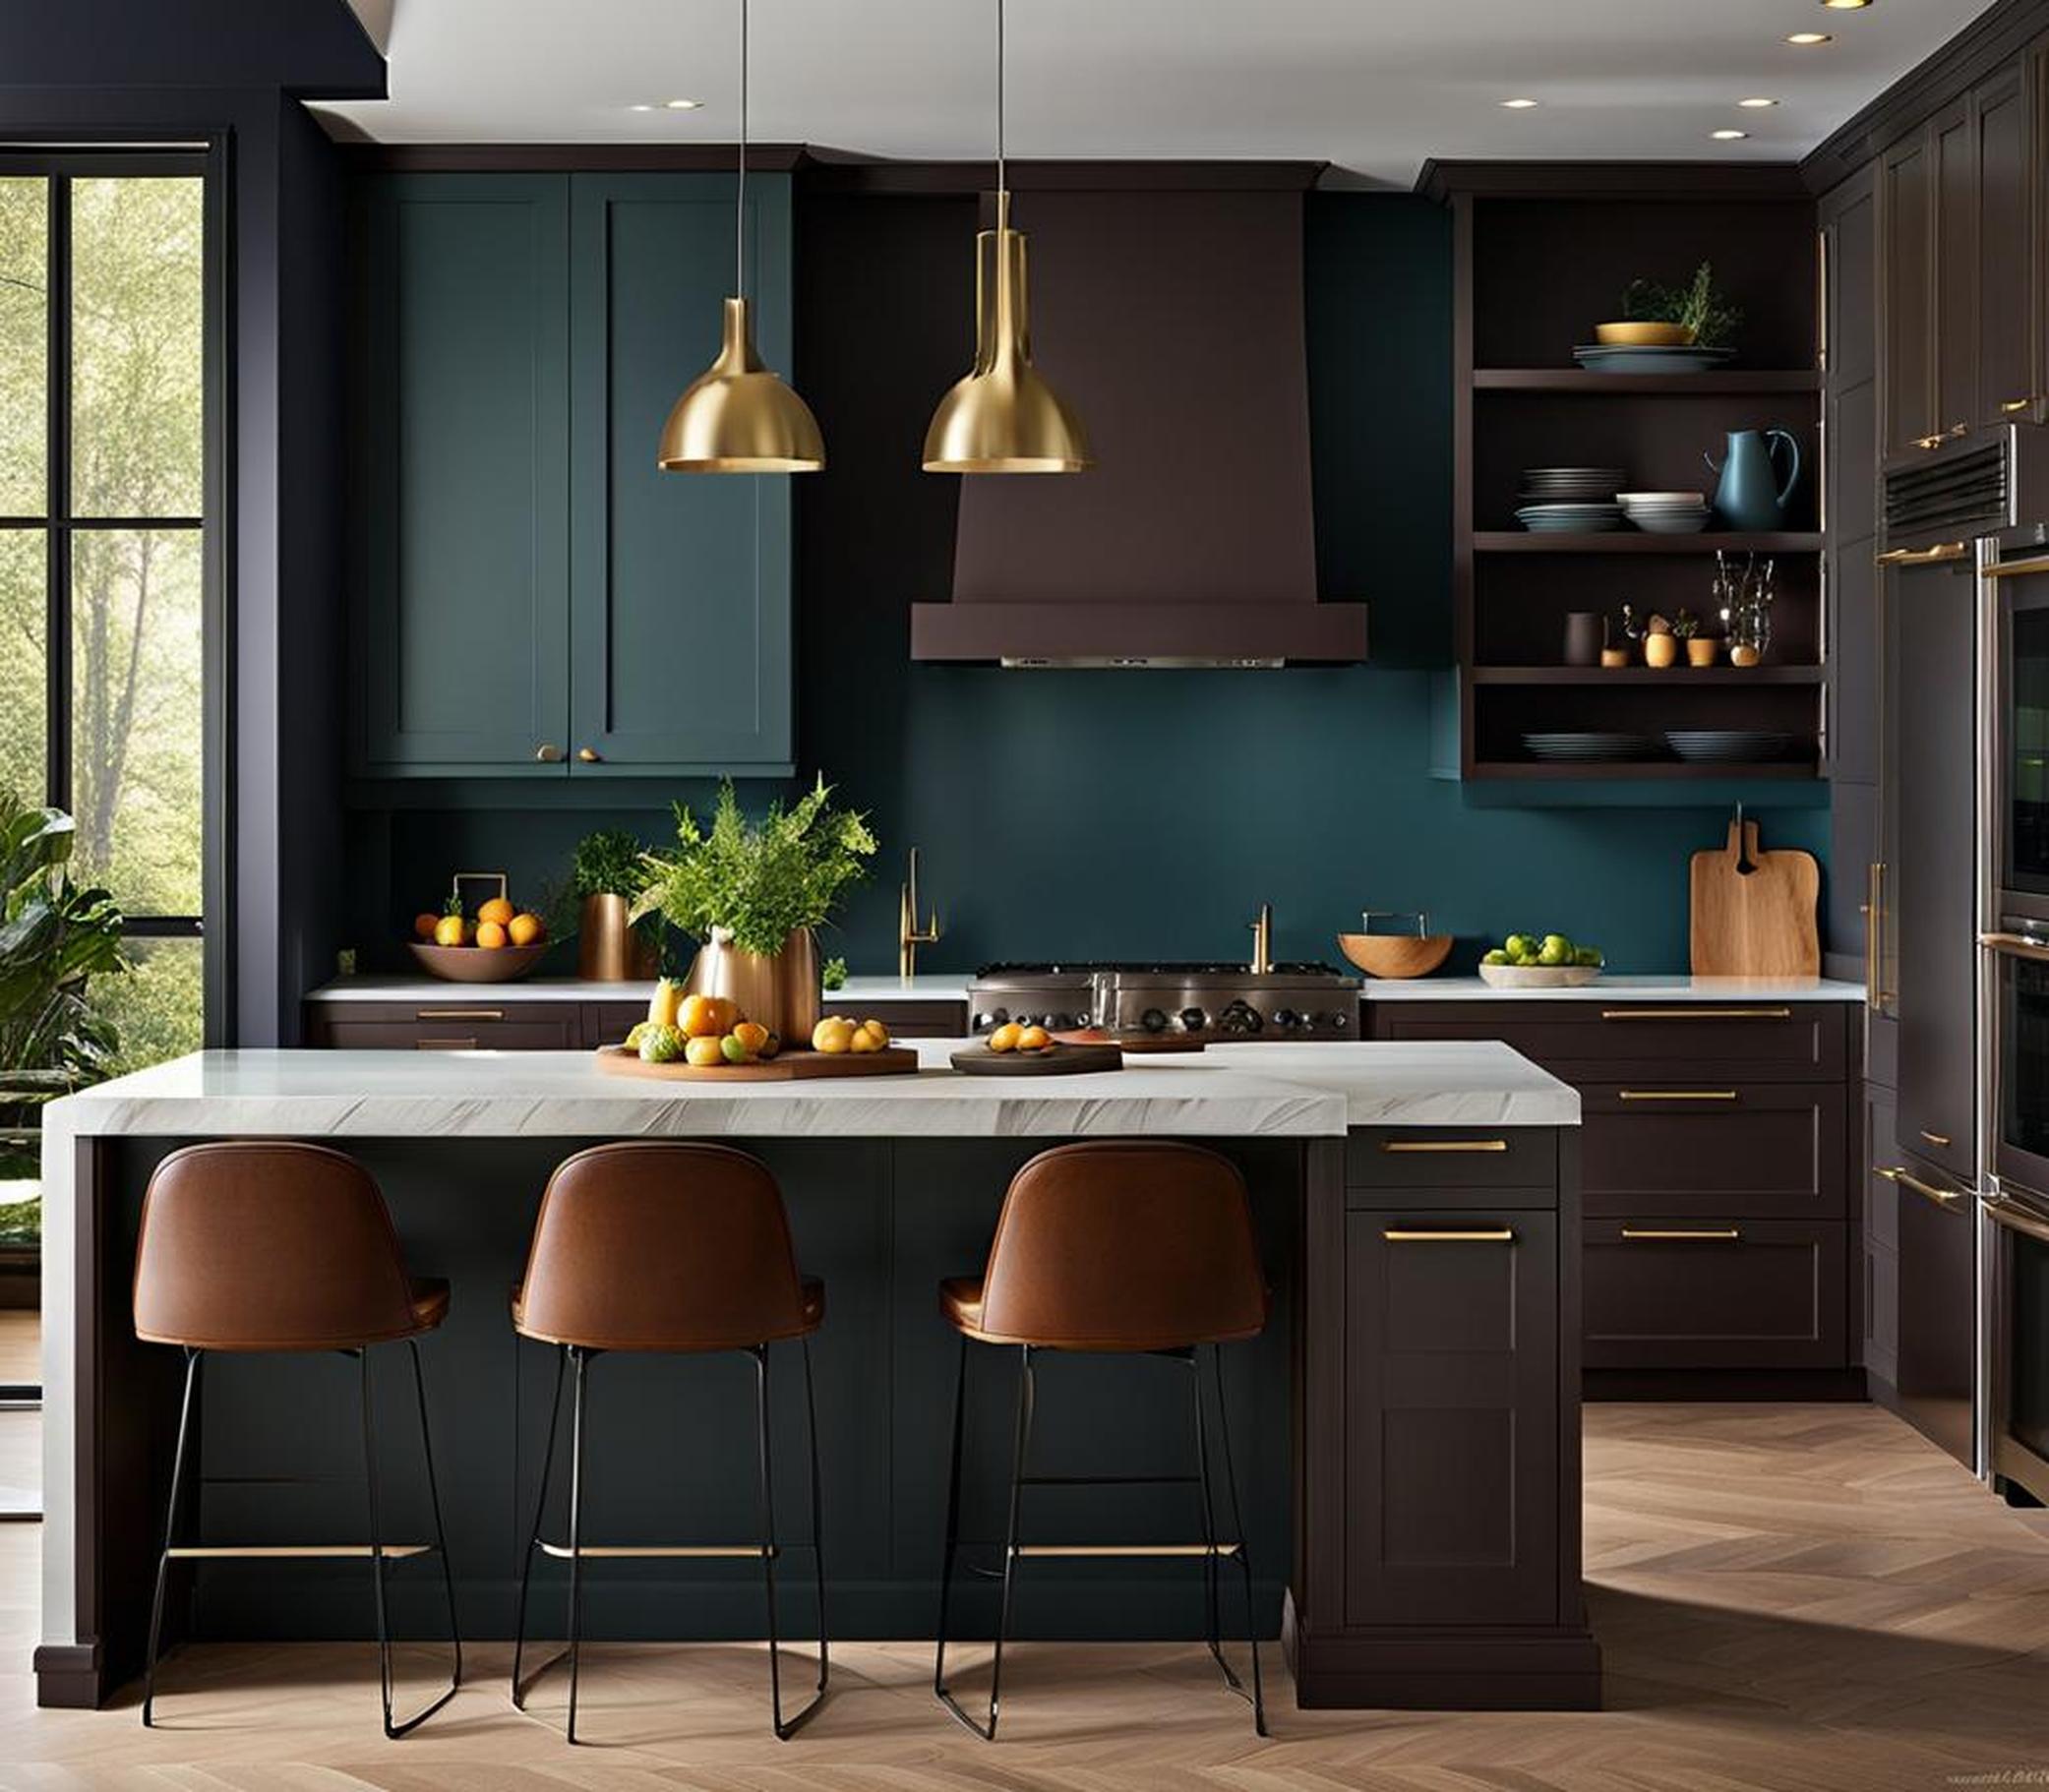 kitchen wall colors with dark cabinets